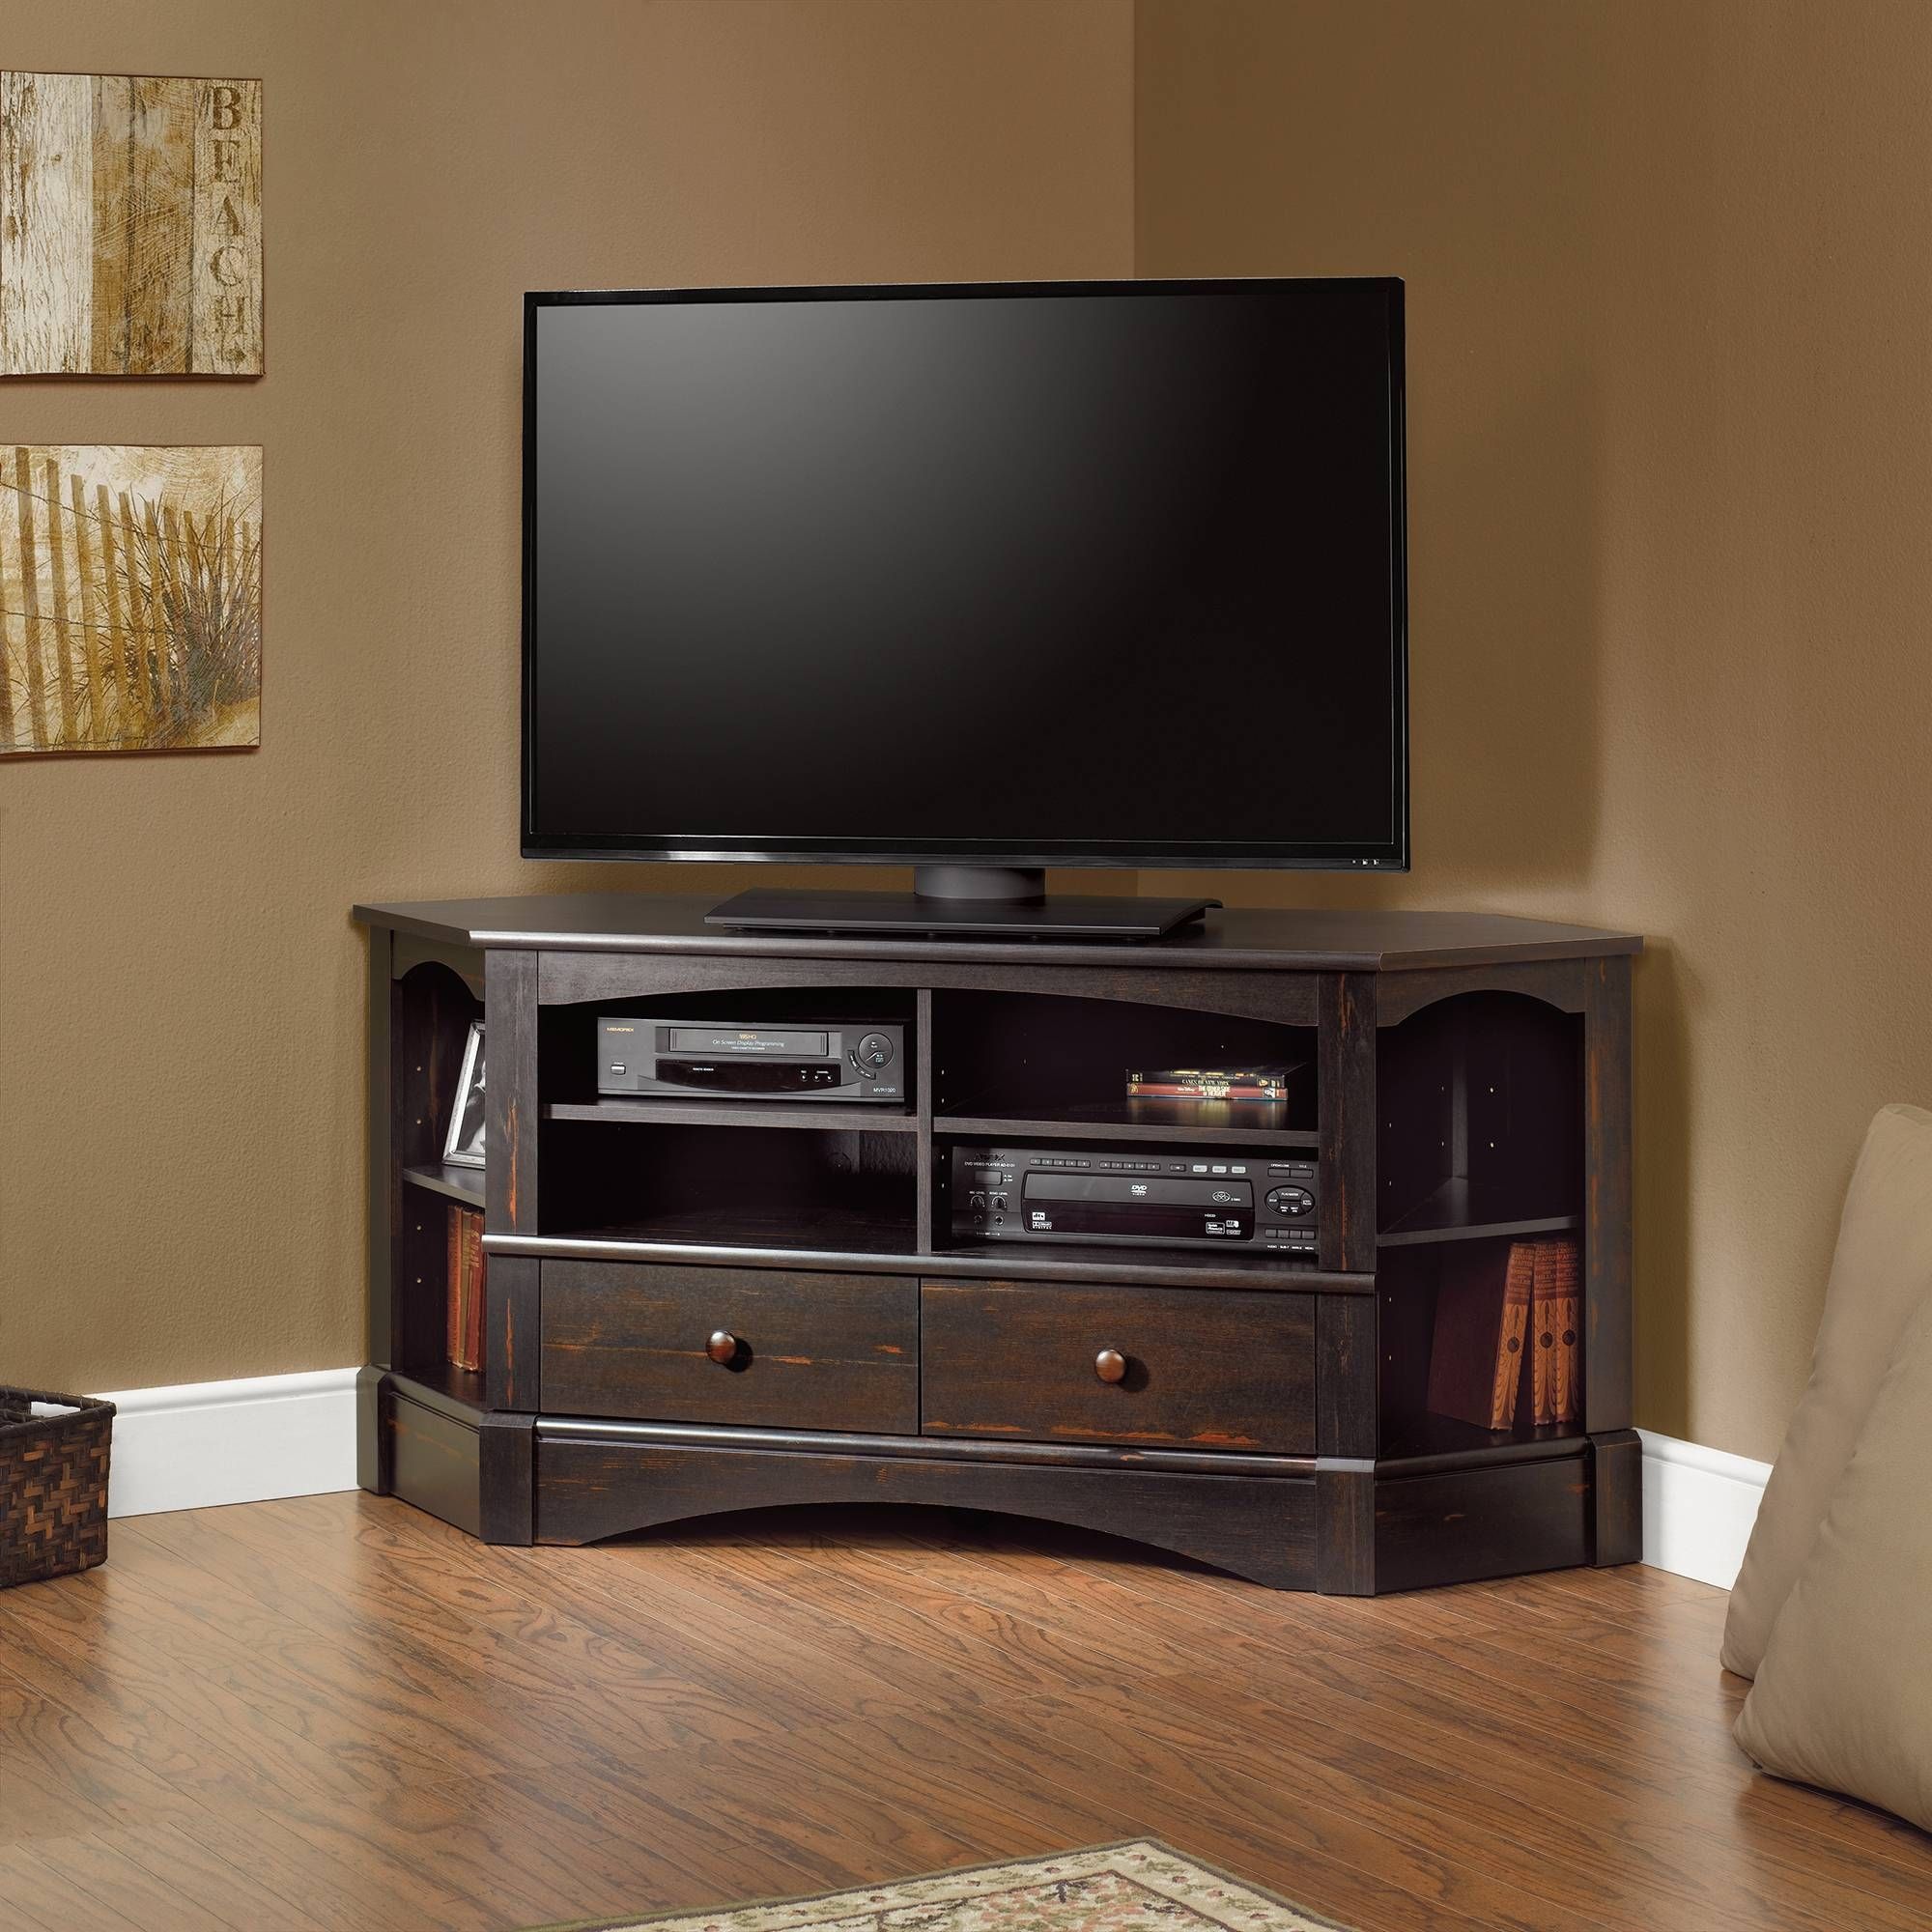 Fancy Matte Varnished Dark Oak Wood Tall Corner Tv Stand For Throughout Fancy Tv Cabinets (View 4 of 15)